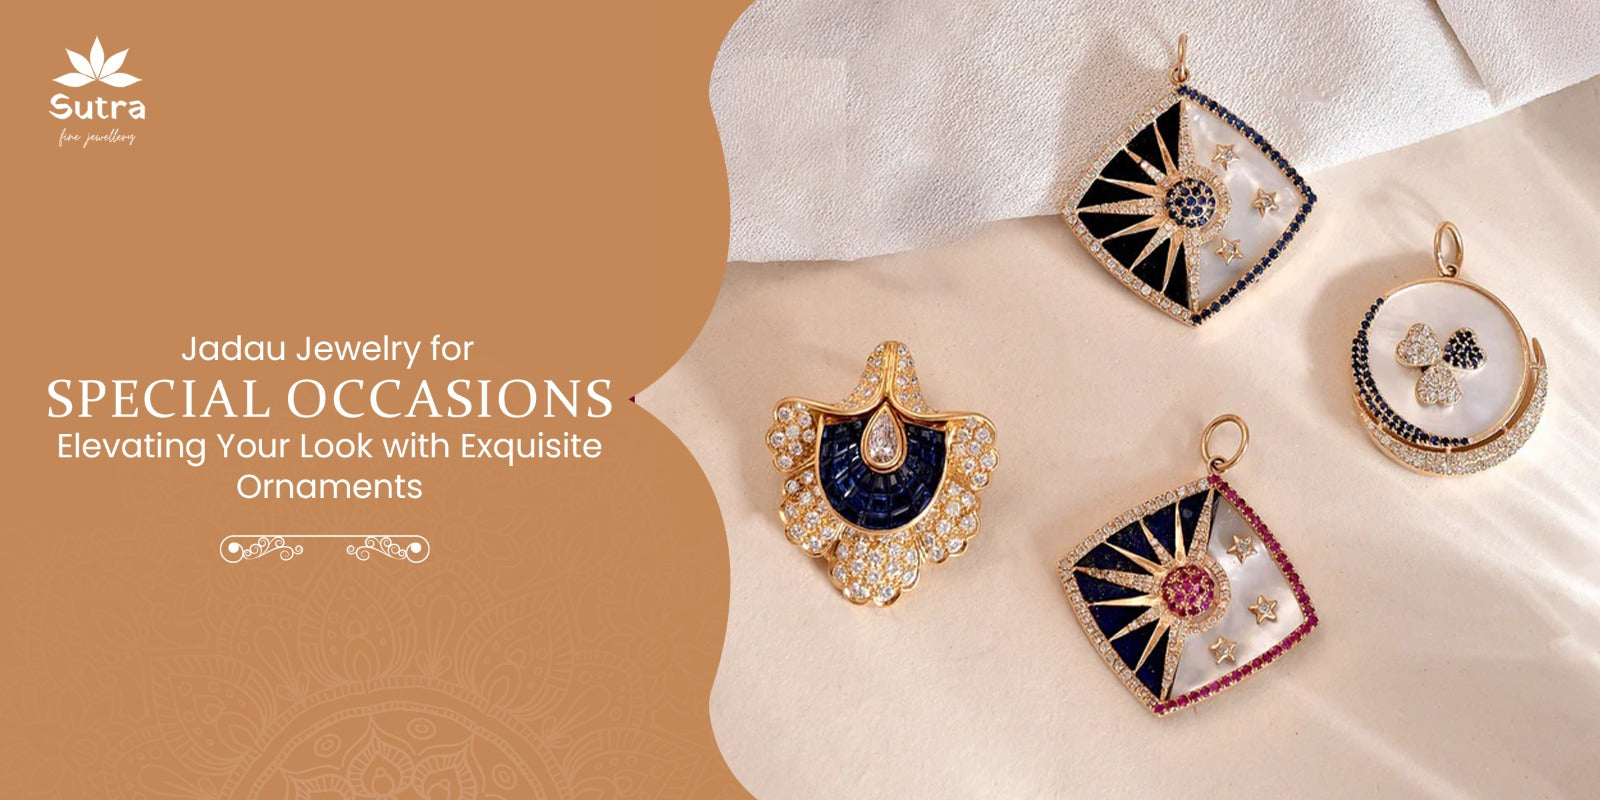 Jadau Jewelry for Special Occasions: Elevating Your Look with Exquisite Ornaments